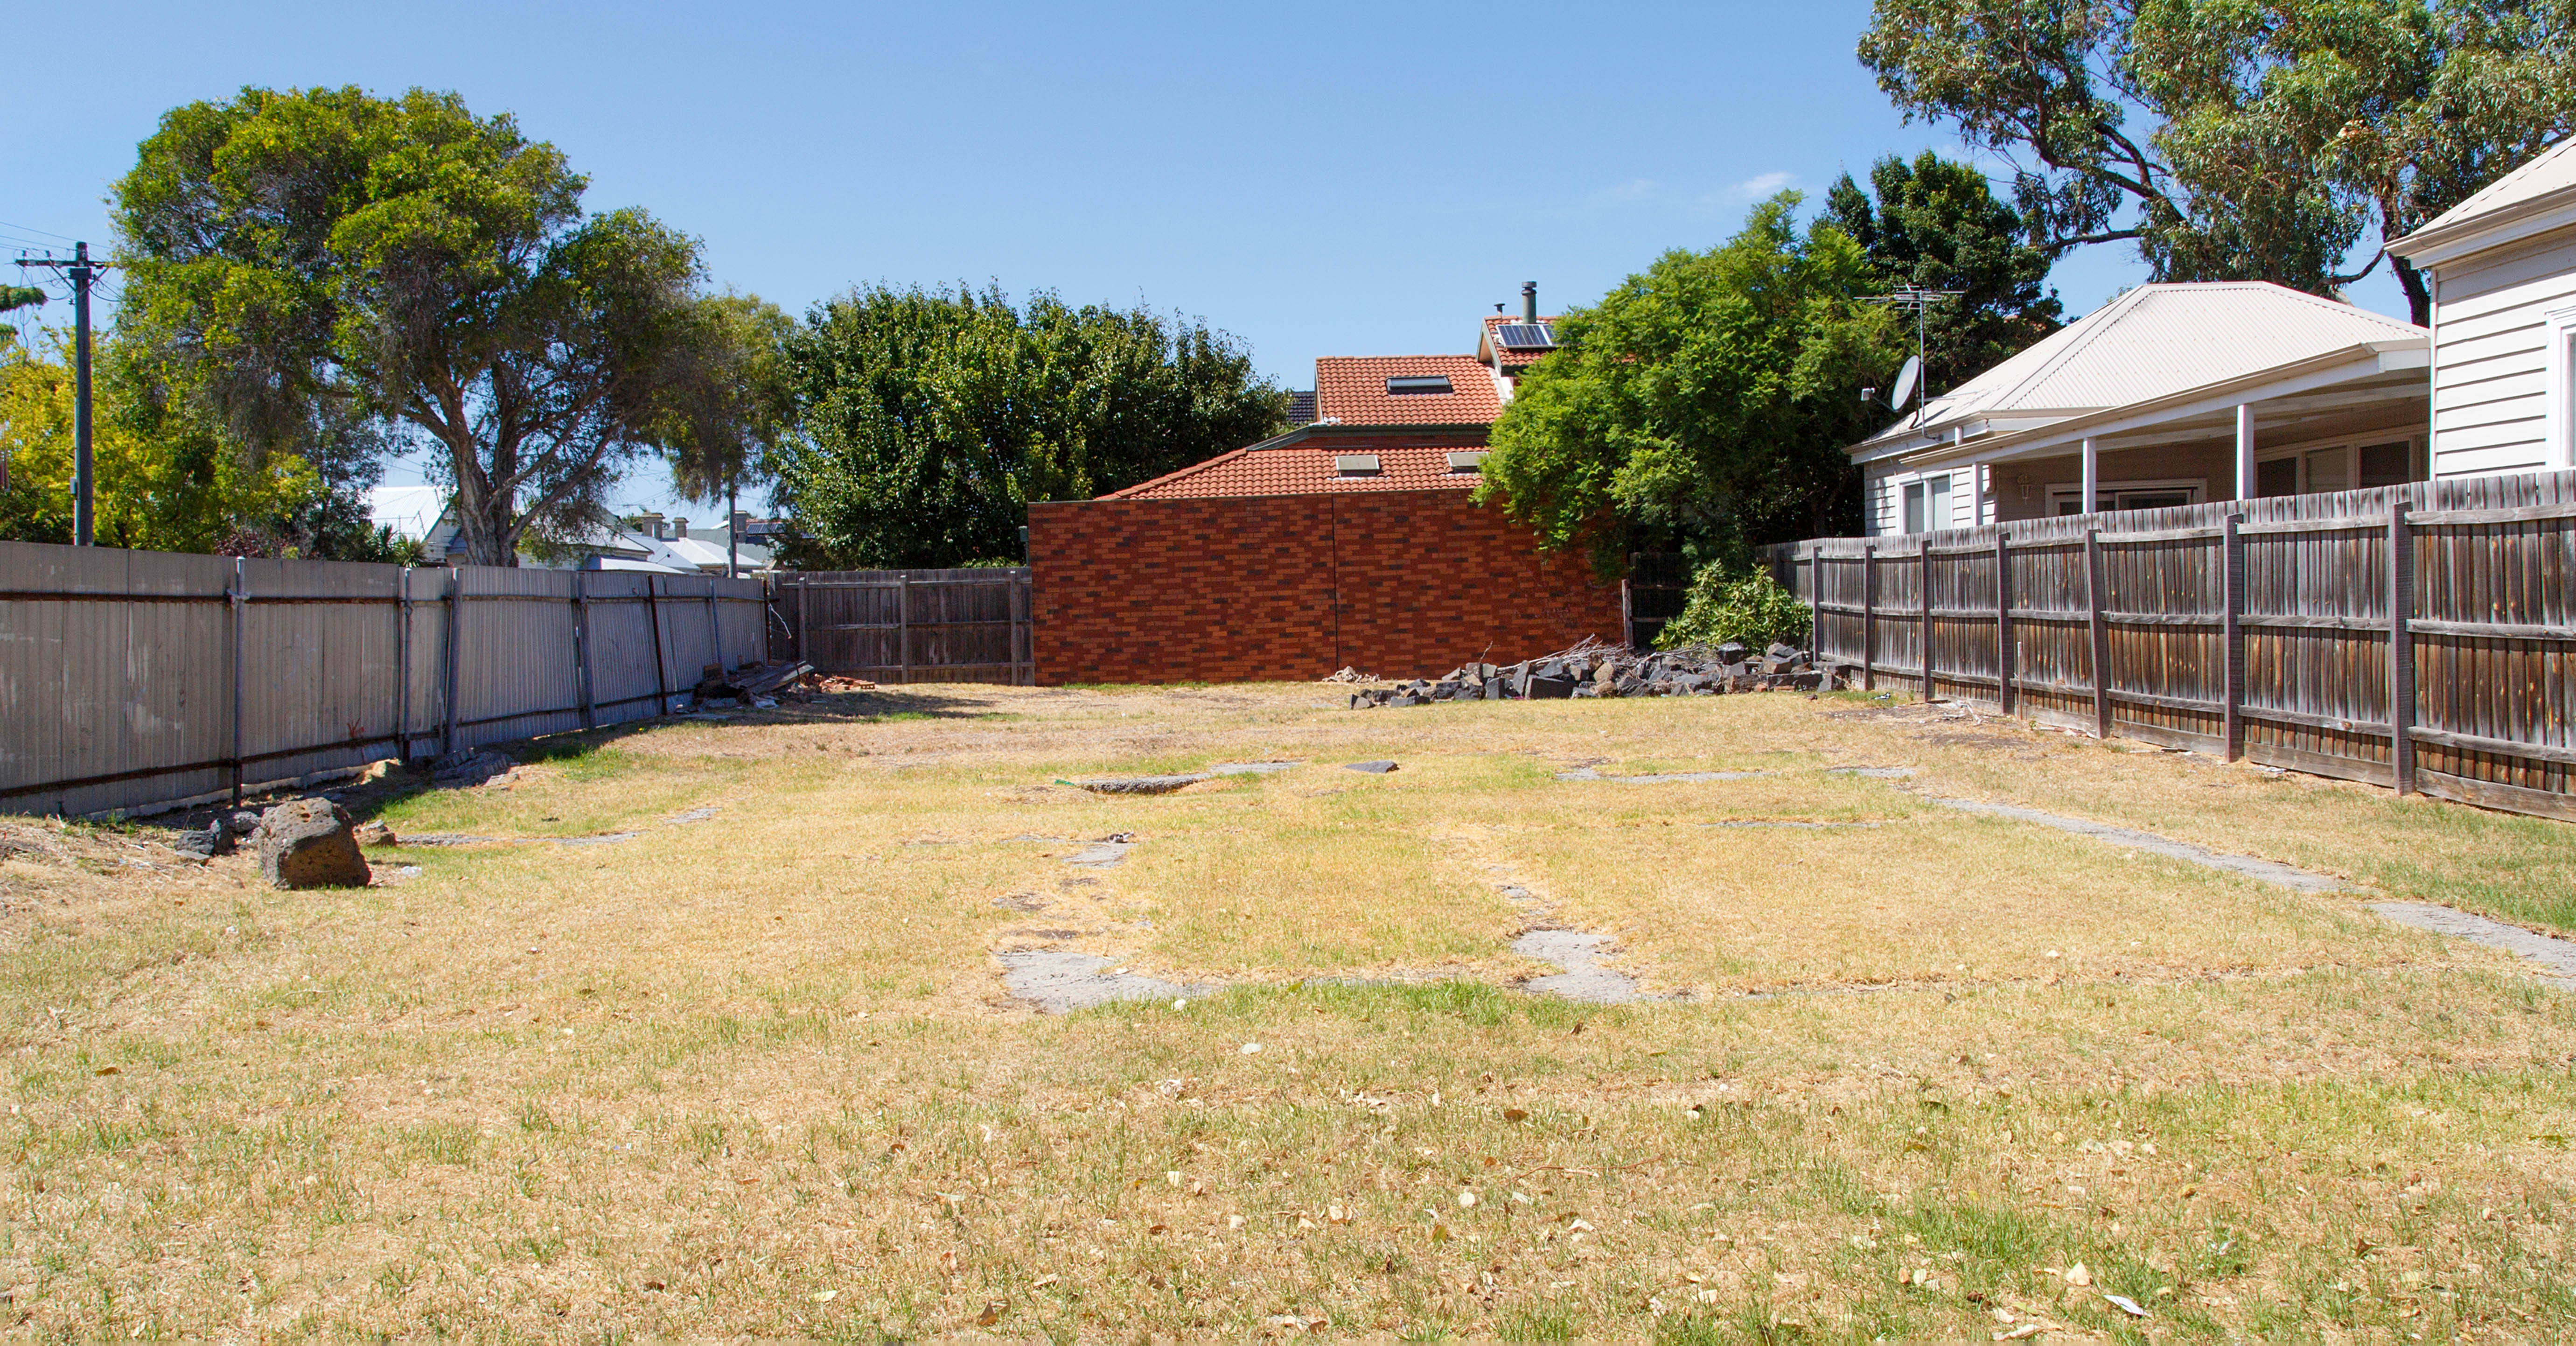 An image of a vacant lot where a house once stood.